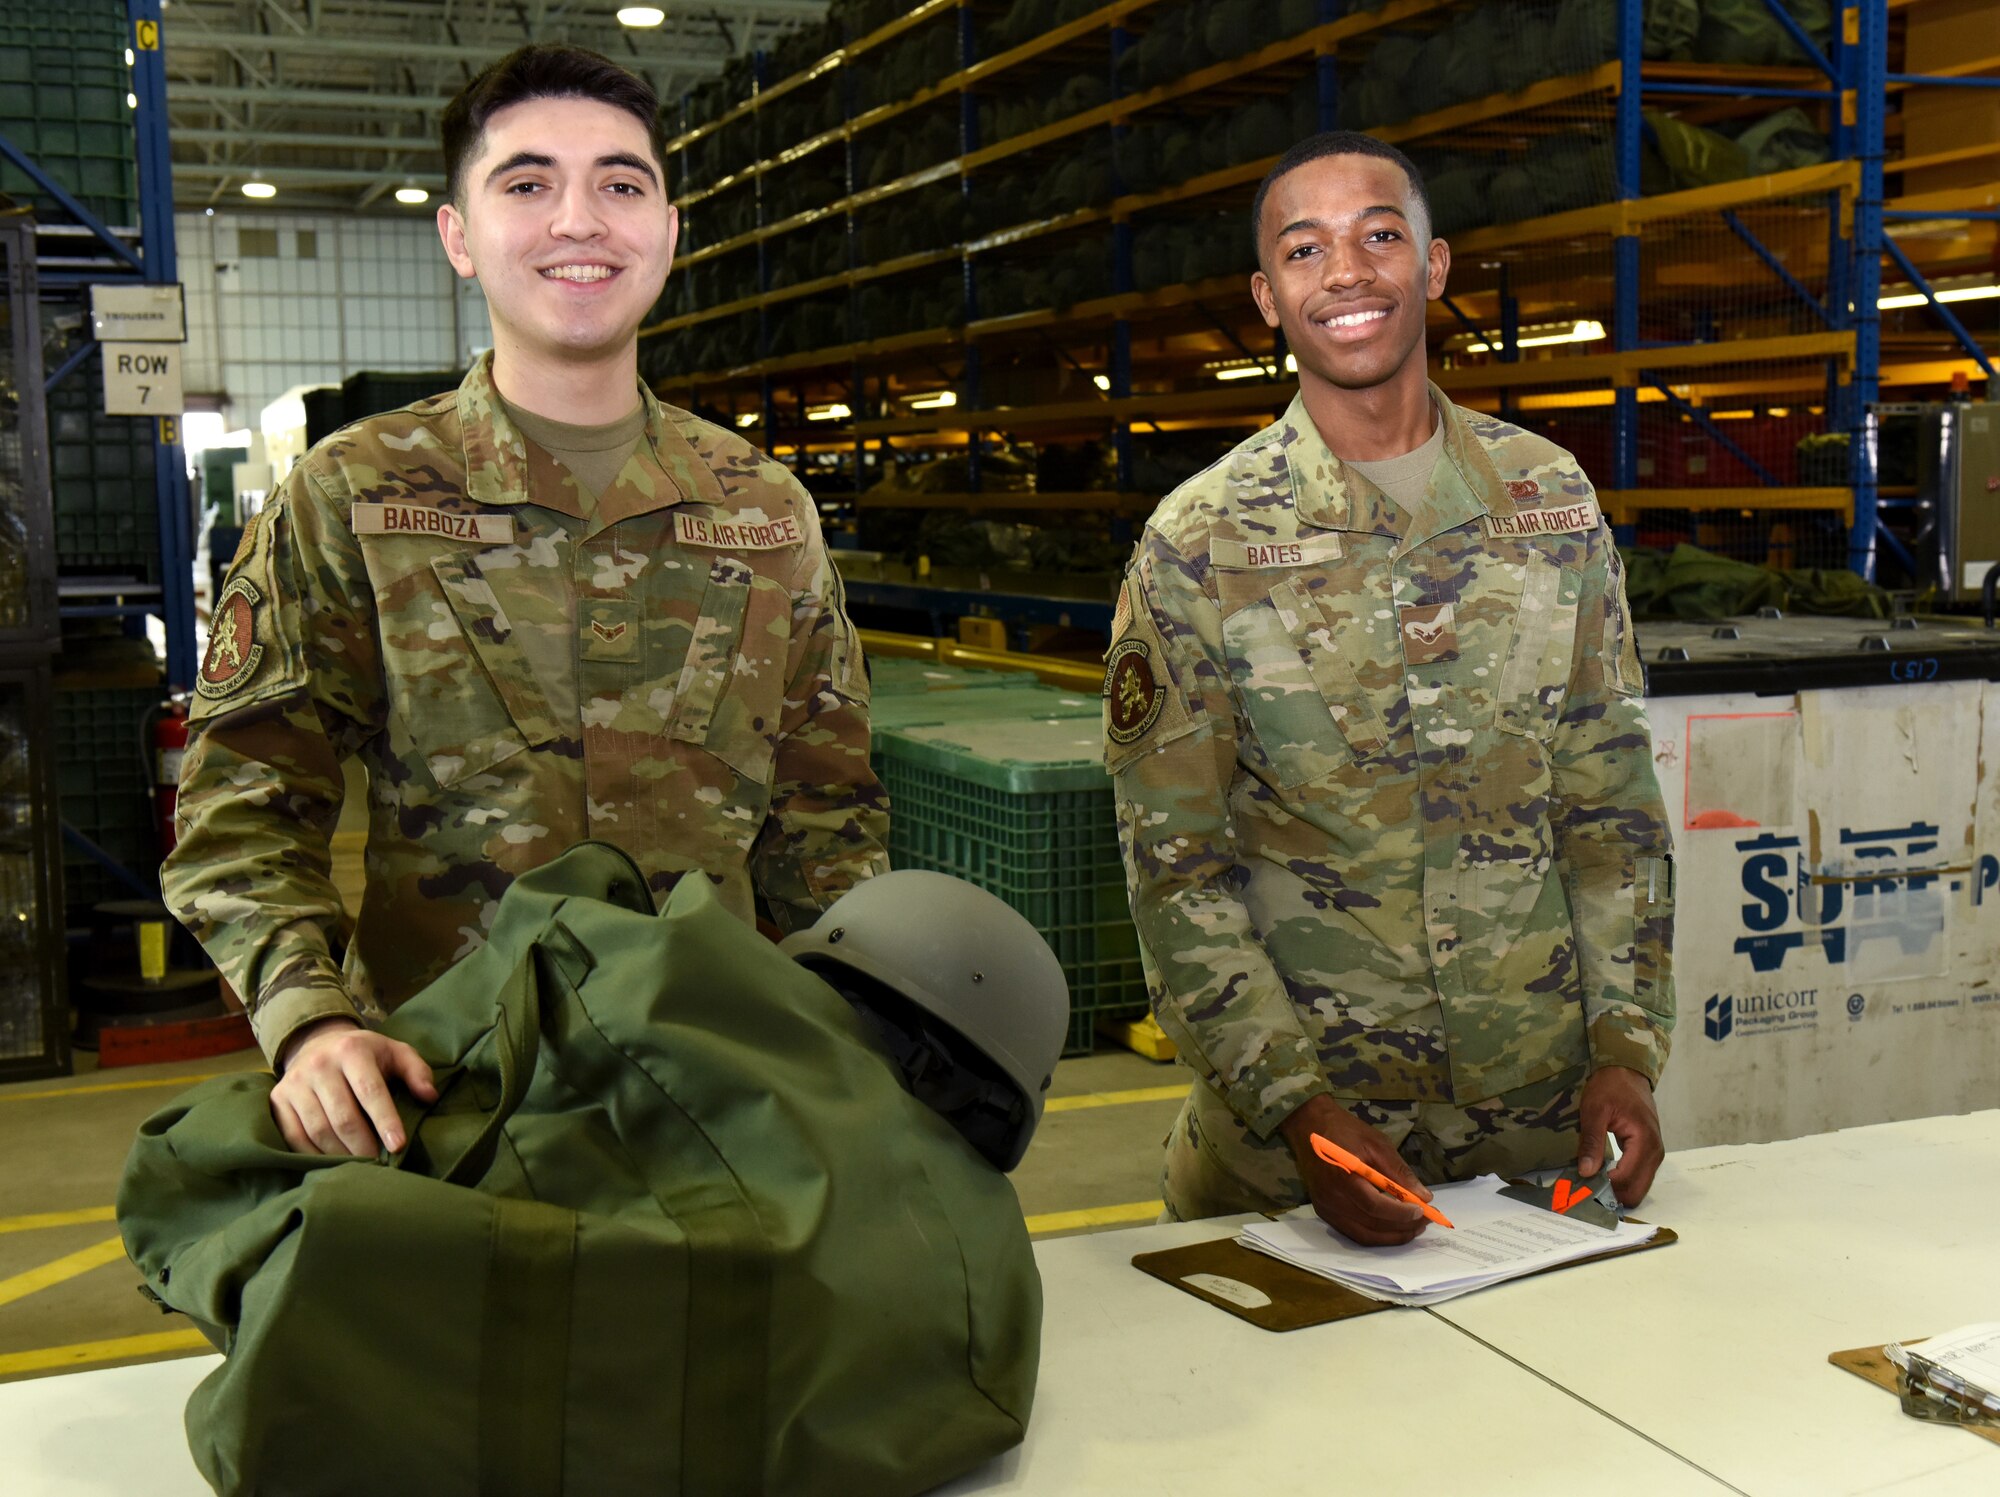 U.S. Air Force Airman 1st Class Christian Barboza, left, and Airman 1st Class Demetrius Bates, both 100th Logistics Readiness Squadron Individual Protective Equipment apprentices, check a training “Class C” chemical bag ready to issue to a customer at Royal Air Force Mildenhall, England, March 15, 2022. Airmen in the IPE shop support geographically separated units including RAF Croughton, and Stavanger, Norway, and issue all gear for chemical warfare assets to members tasked for deployments and TDYs, ensuring they are issued the correct equipment. (U.S. Air Force photo by Karen Abeyasekere)